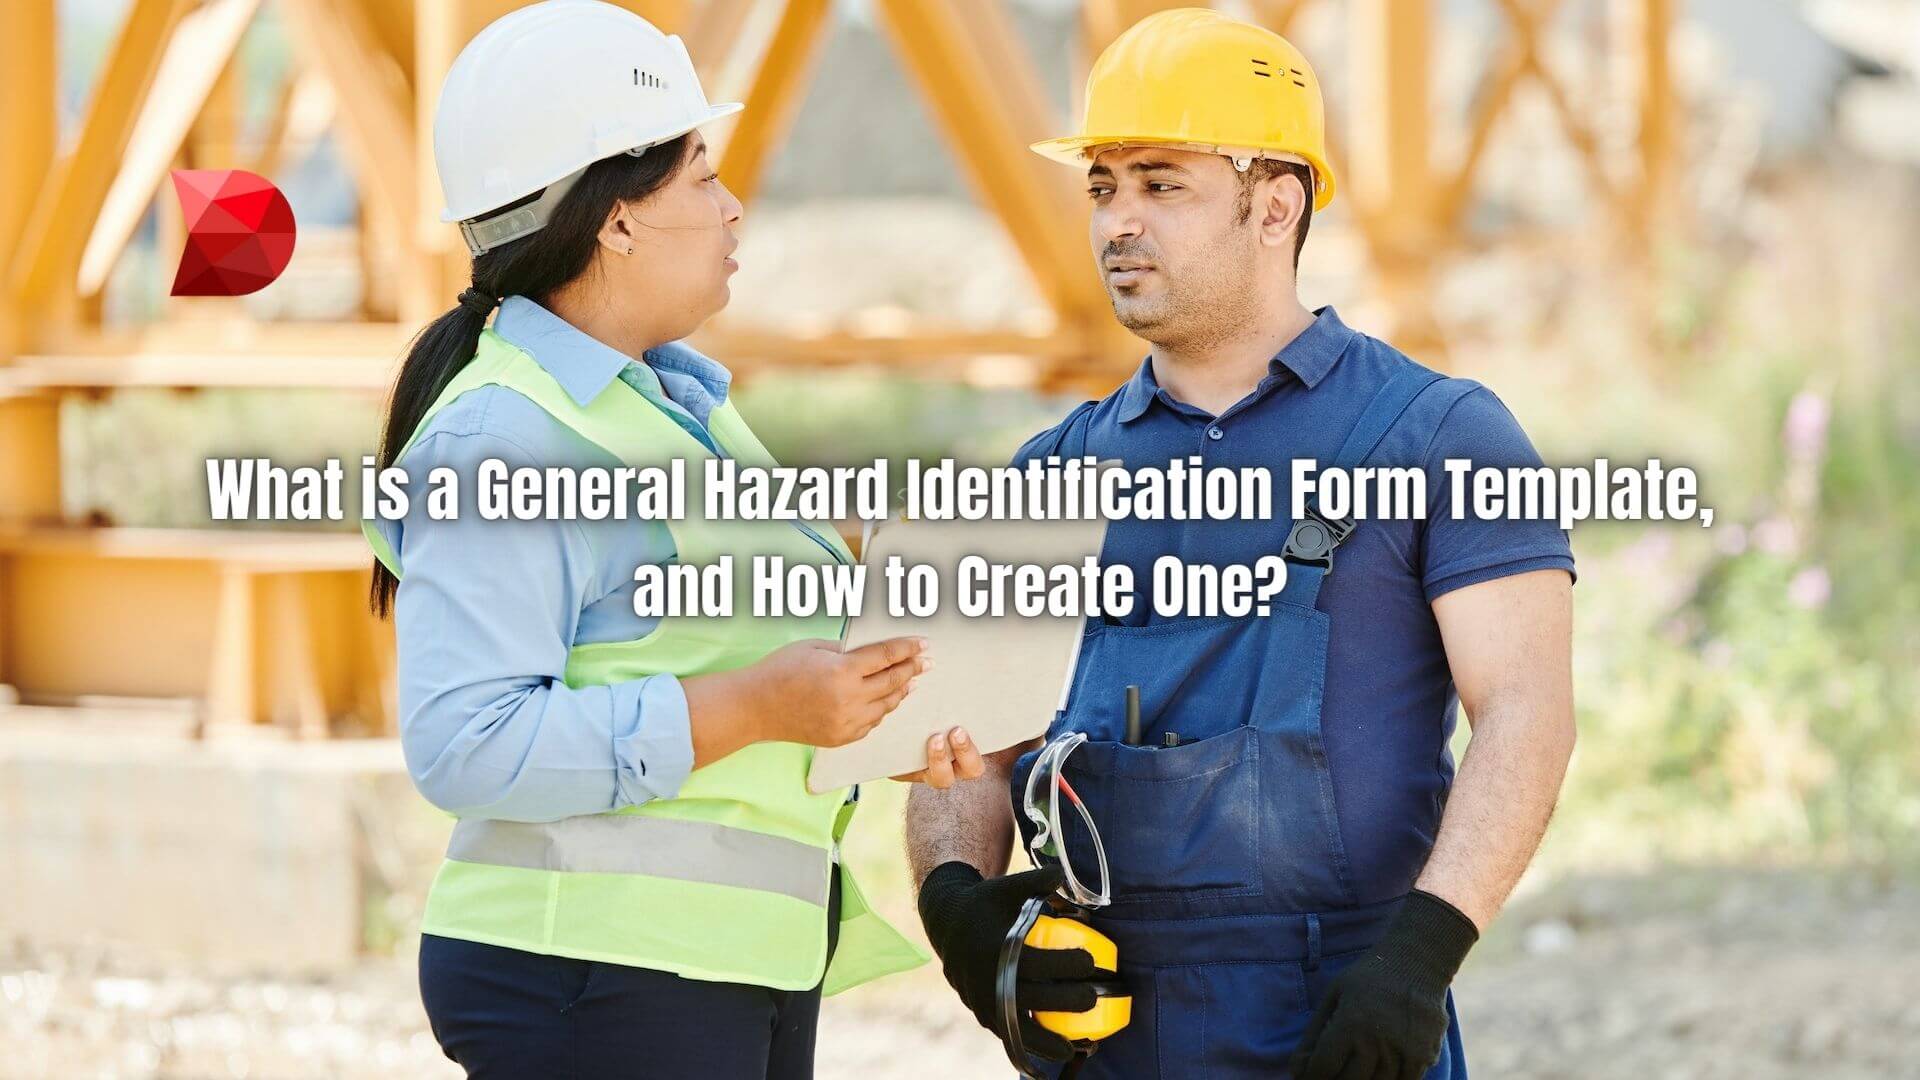 Implementing a General Hazard Identification Form template is a critical step toward creating a safer work environment. Learn how!